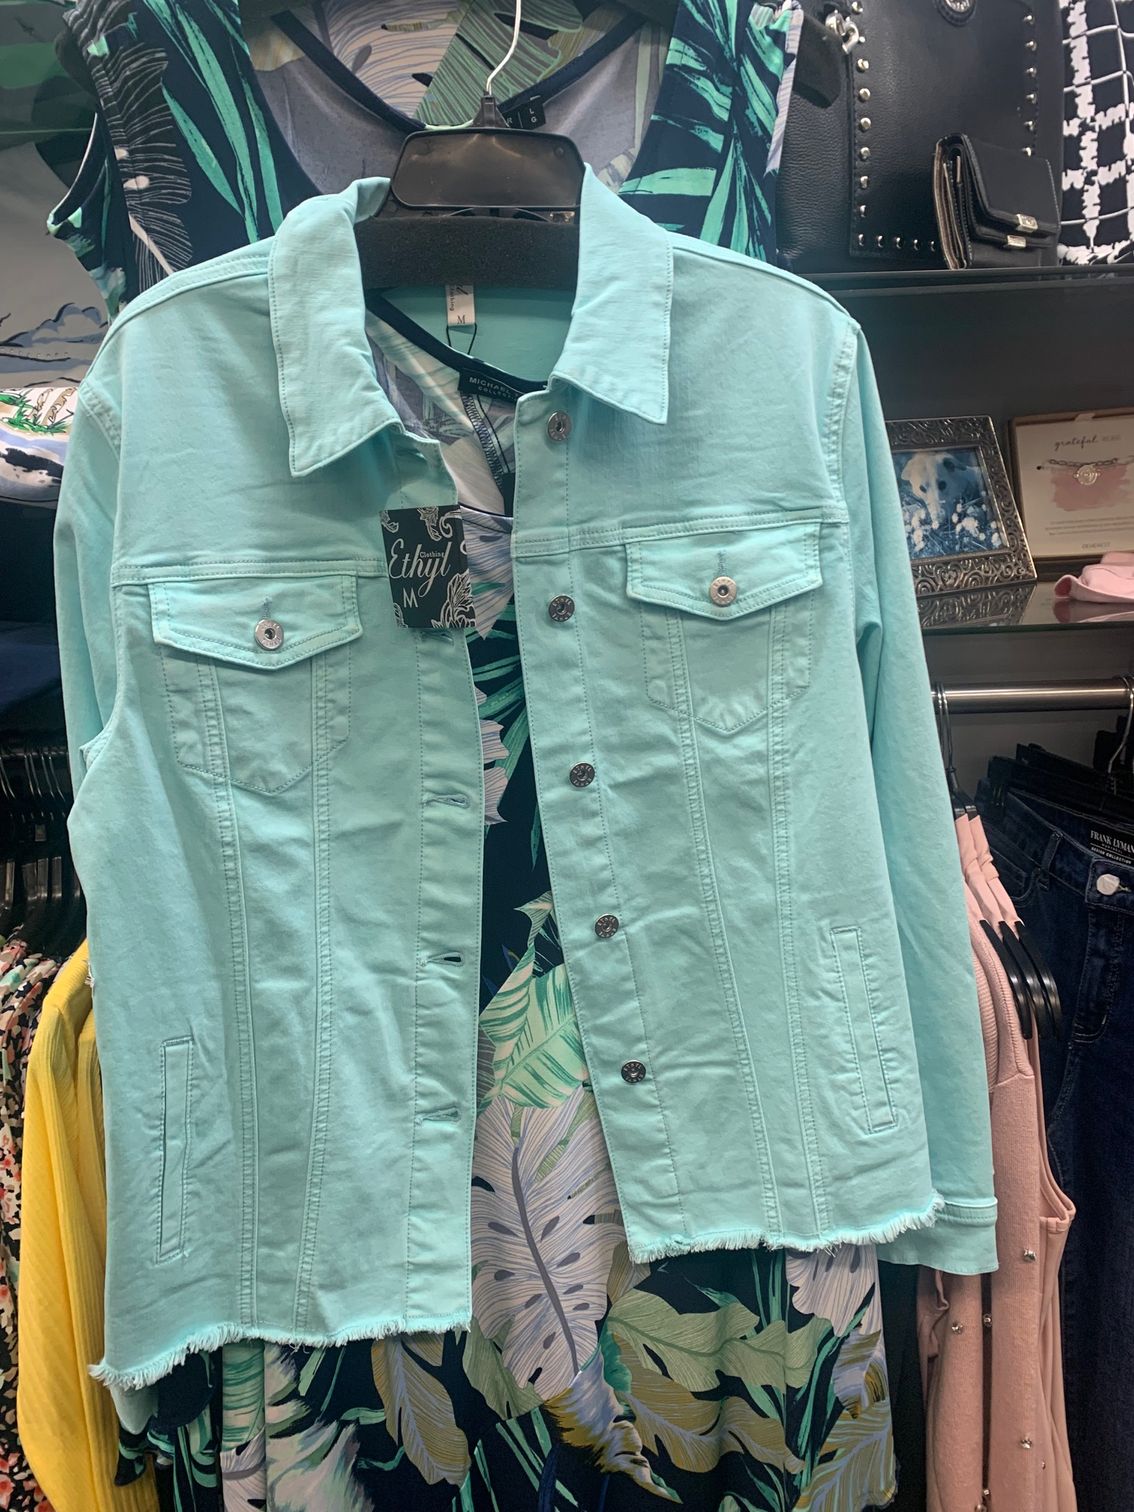 A light blue denim jacket is hanging on a hanger in a store.